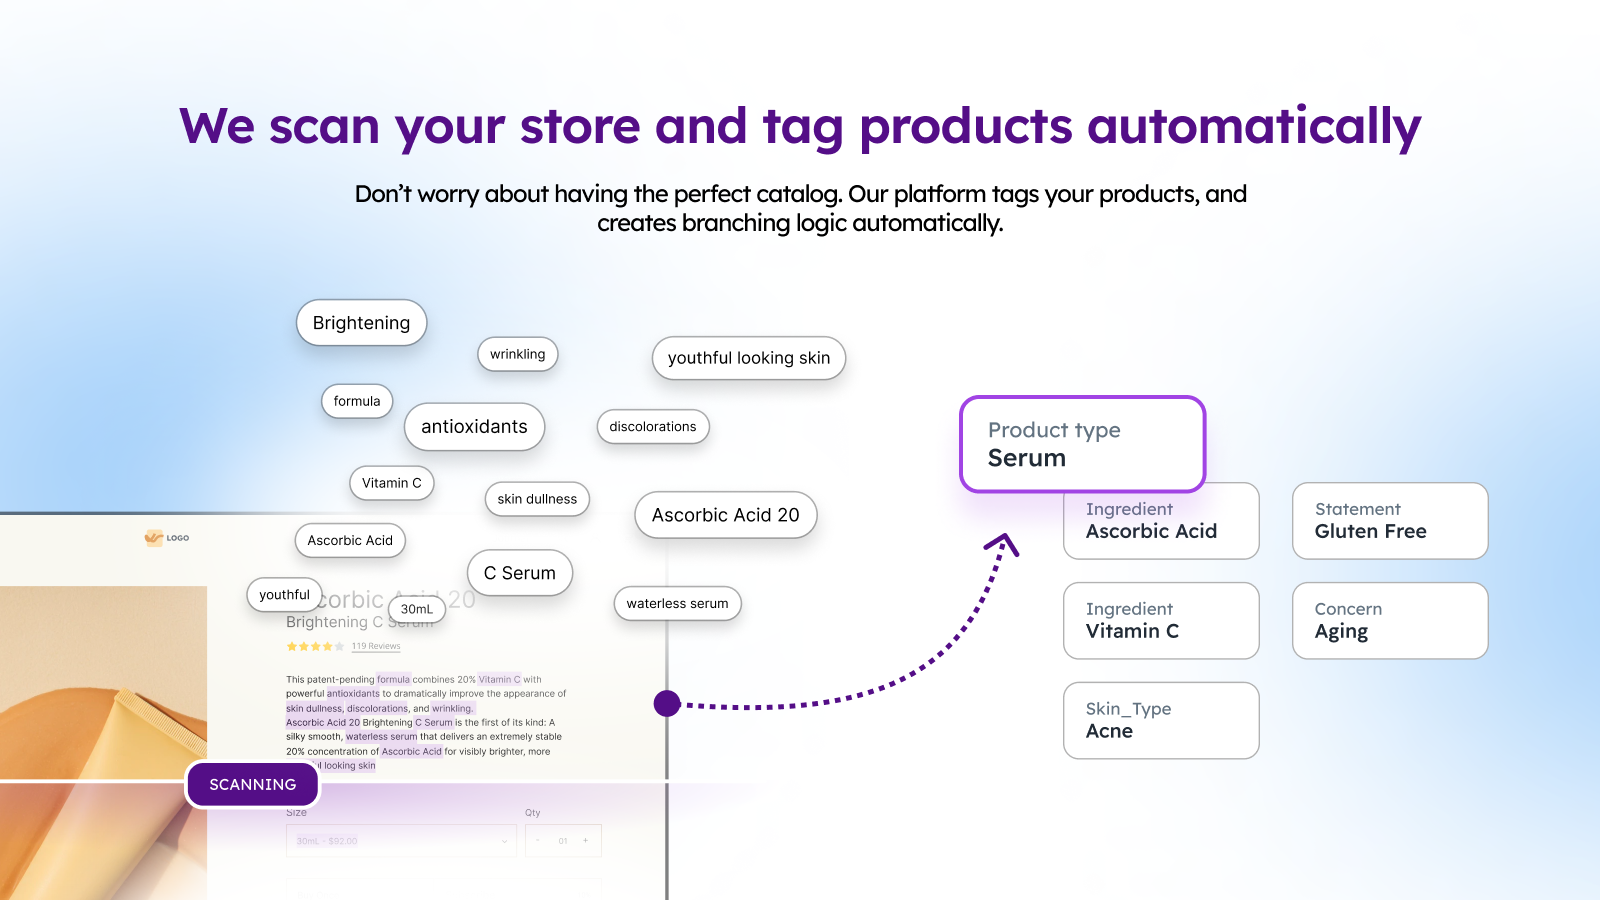 We scan your store and tag products automatically